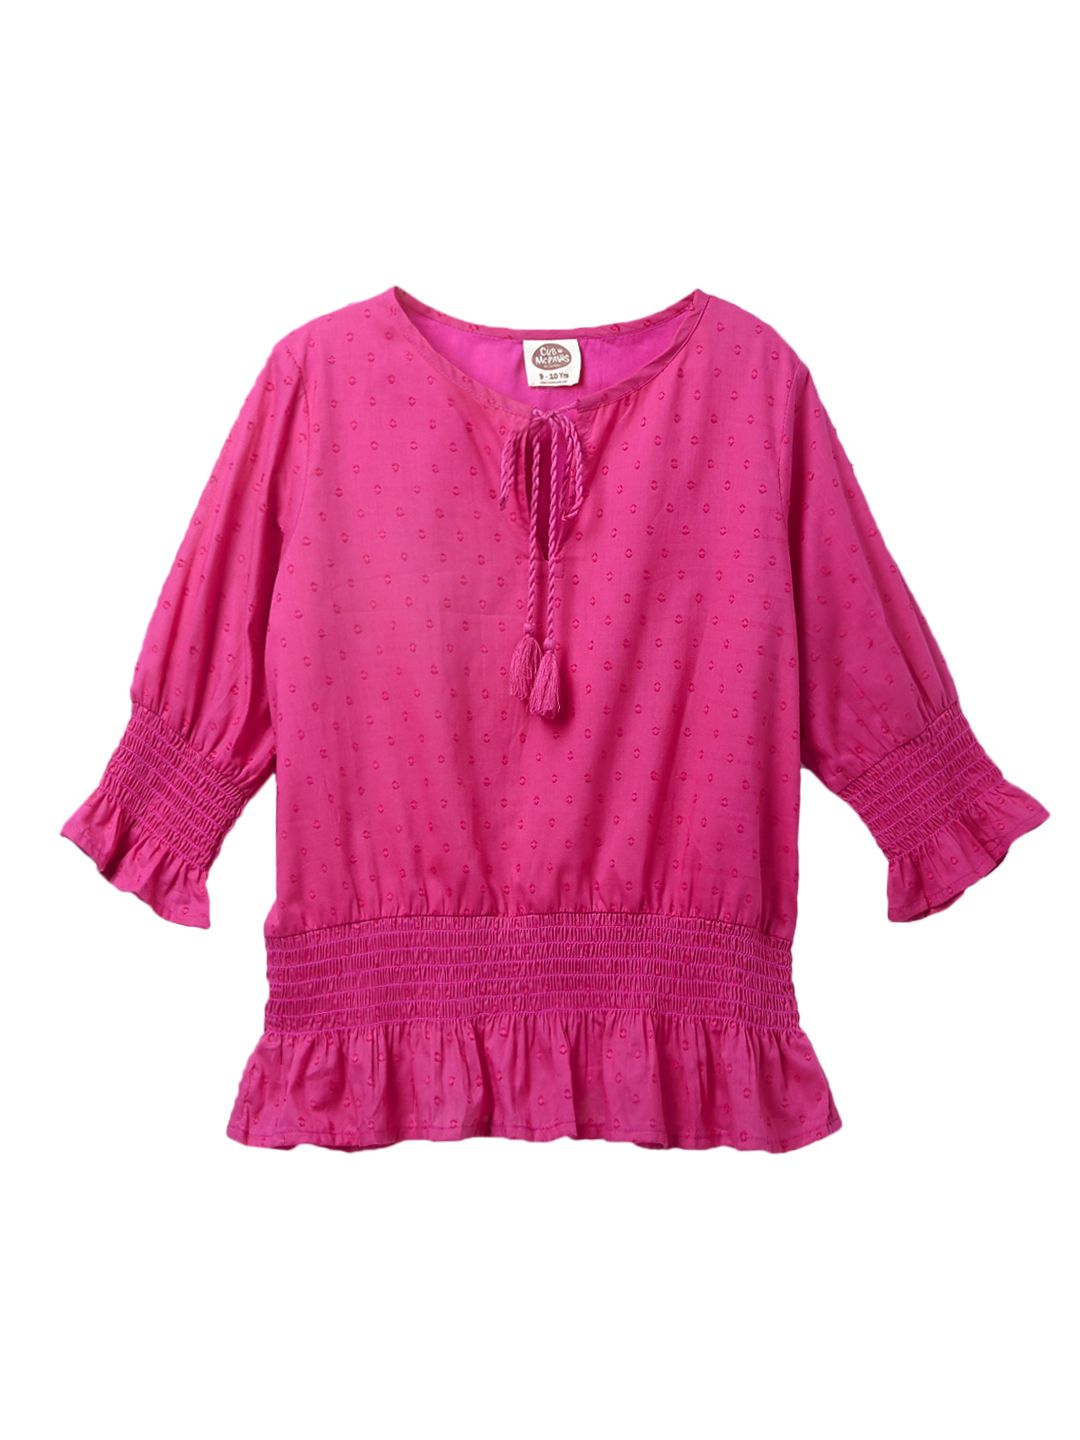 Girls Pink Top With Drawstrings